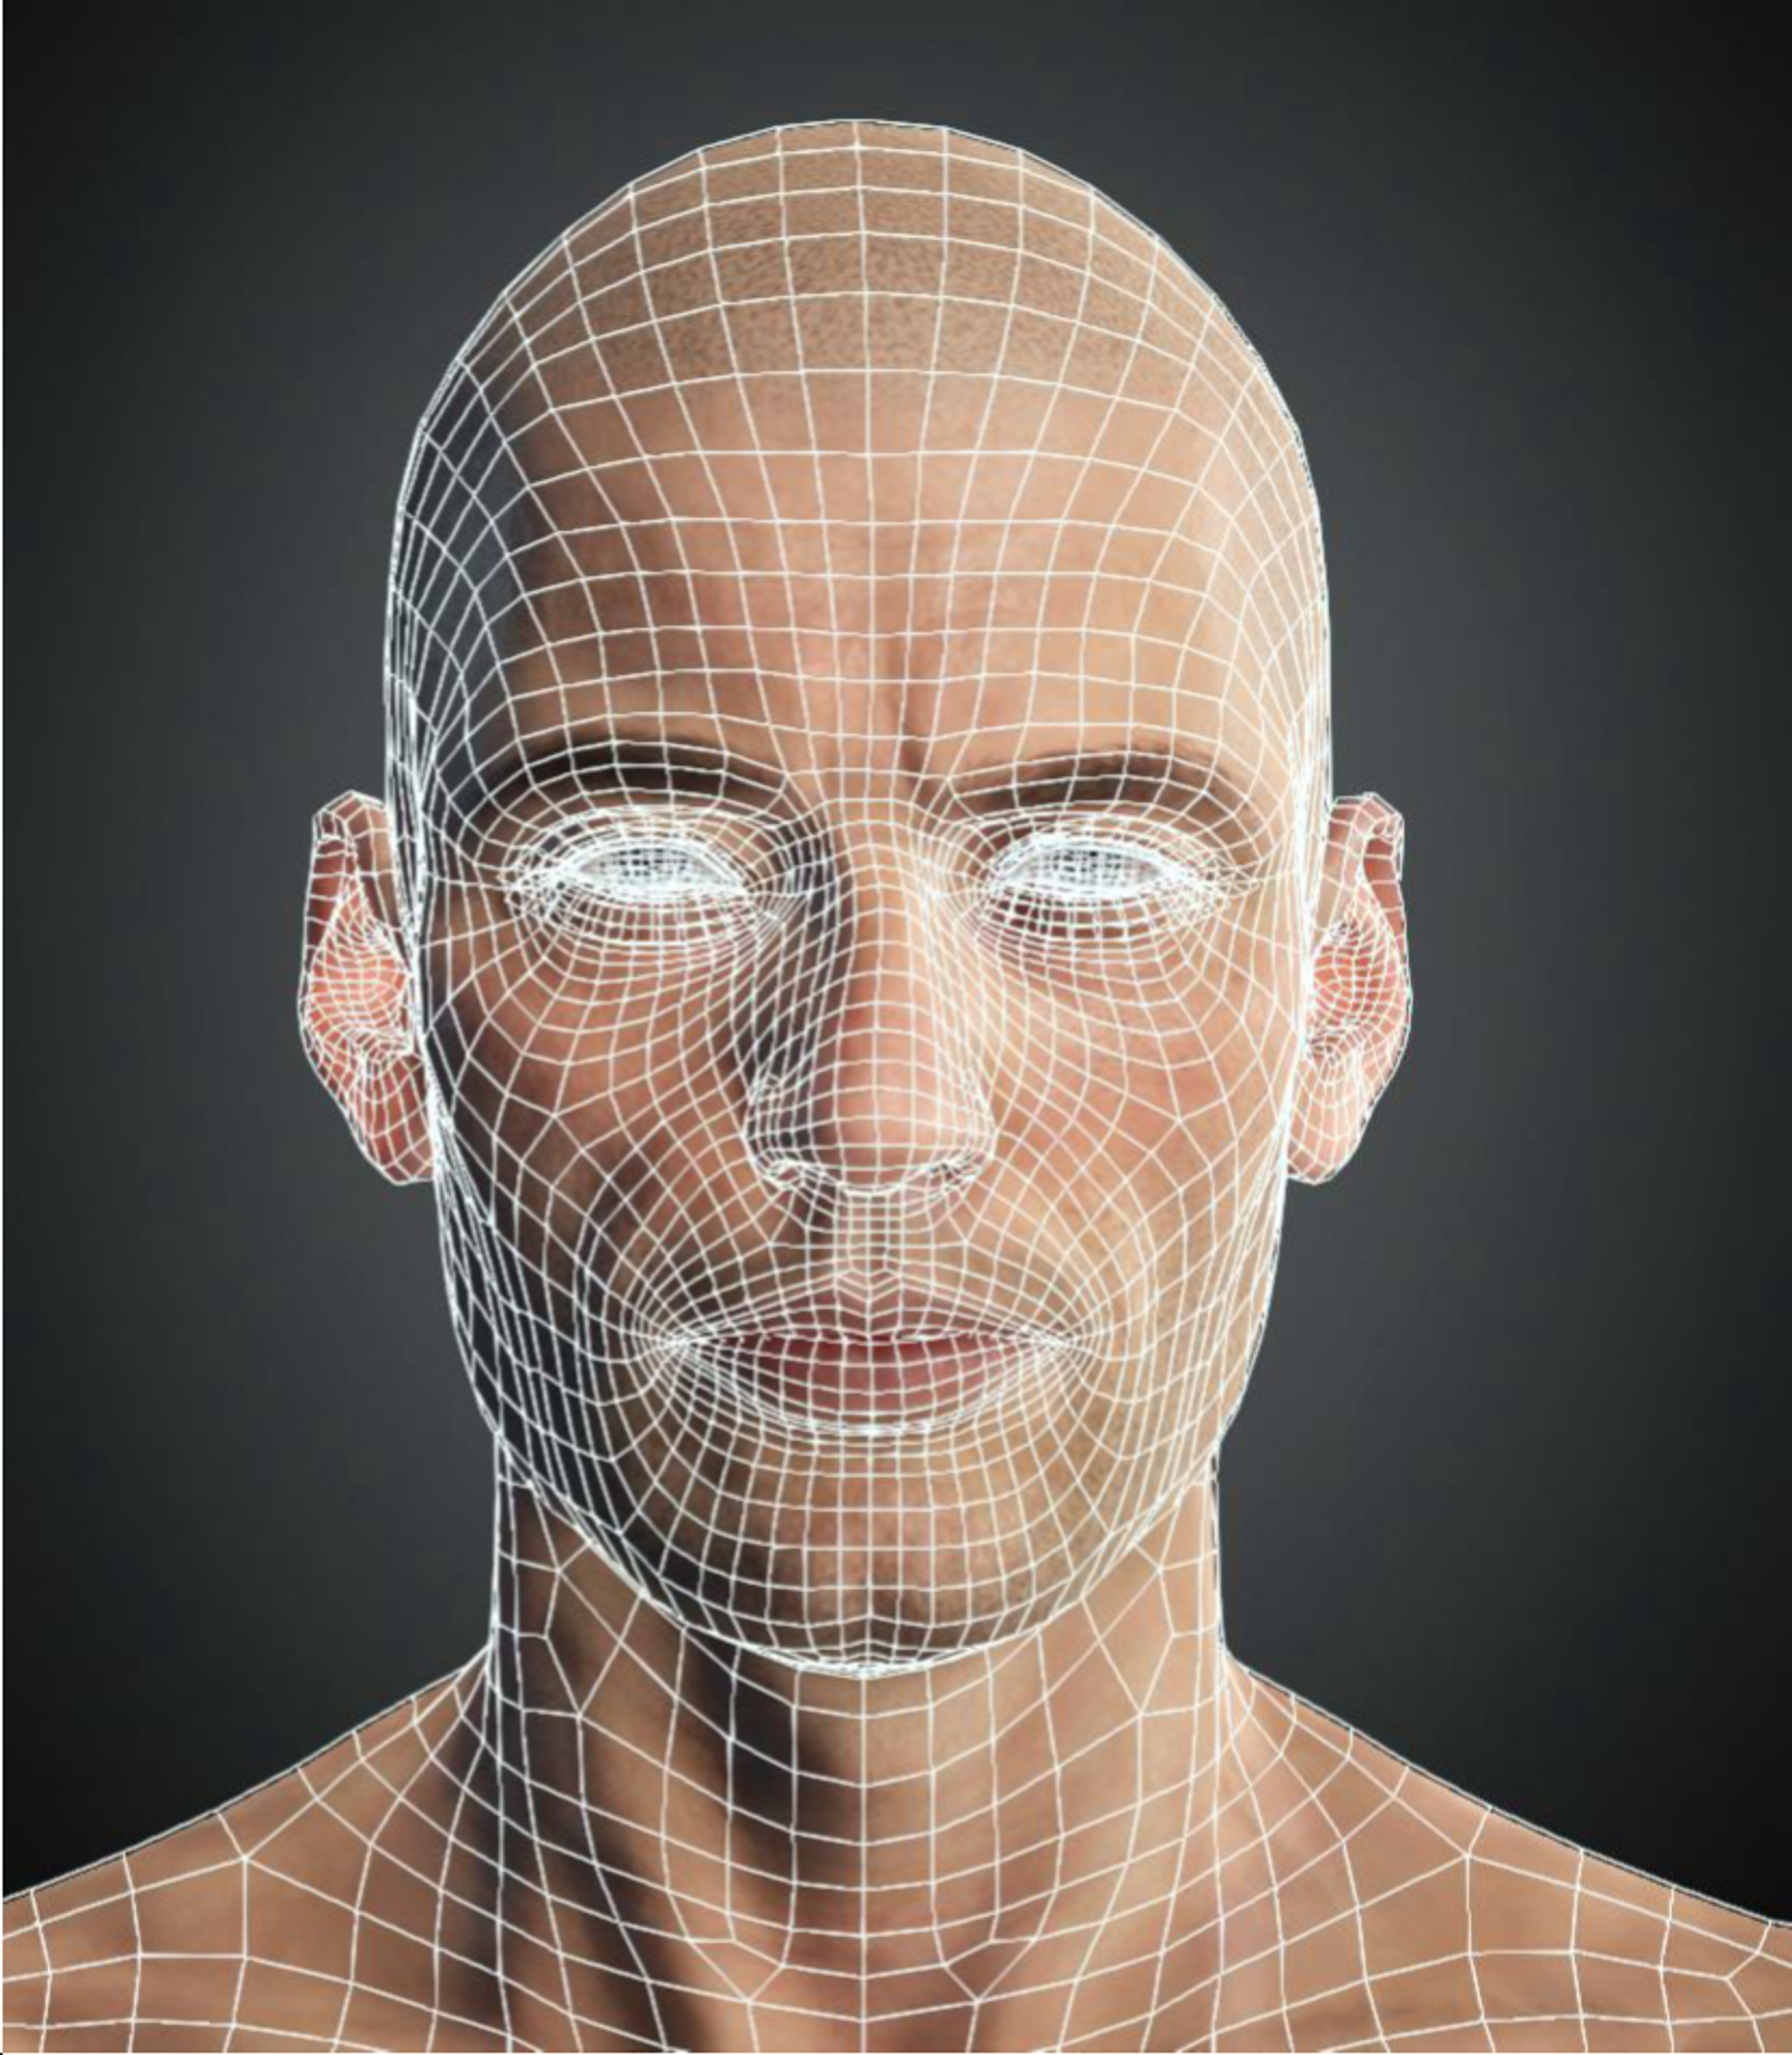 Different face sharing the same topology